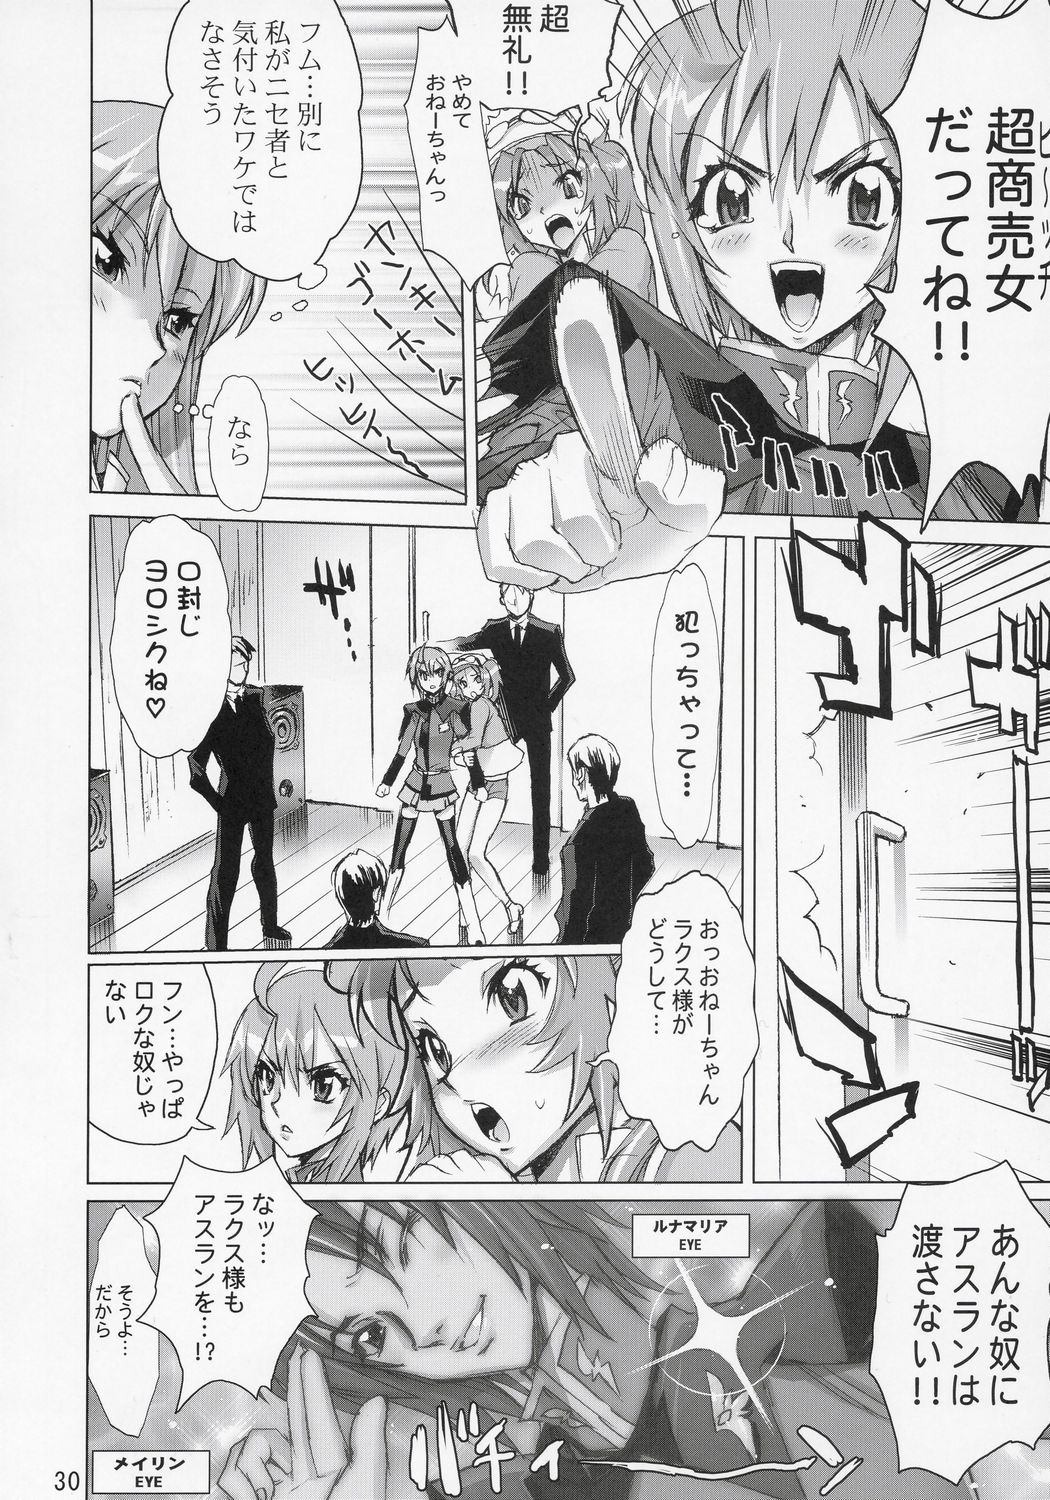 (C69) [Digital Accel Works] Inazuma Warrior 2 (Various) page 29 full